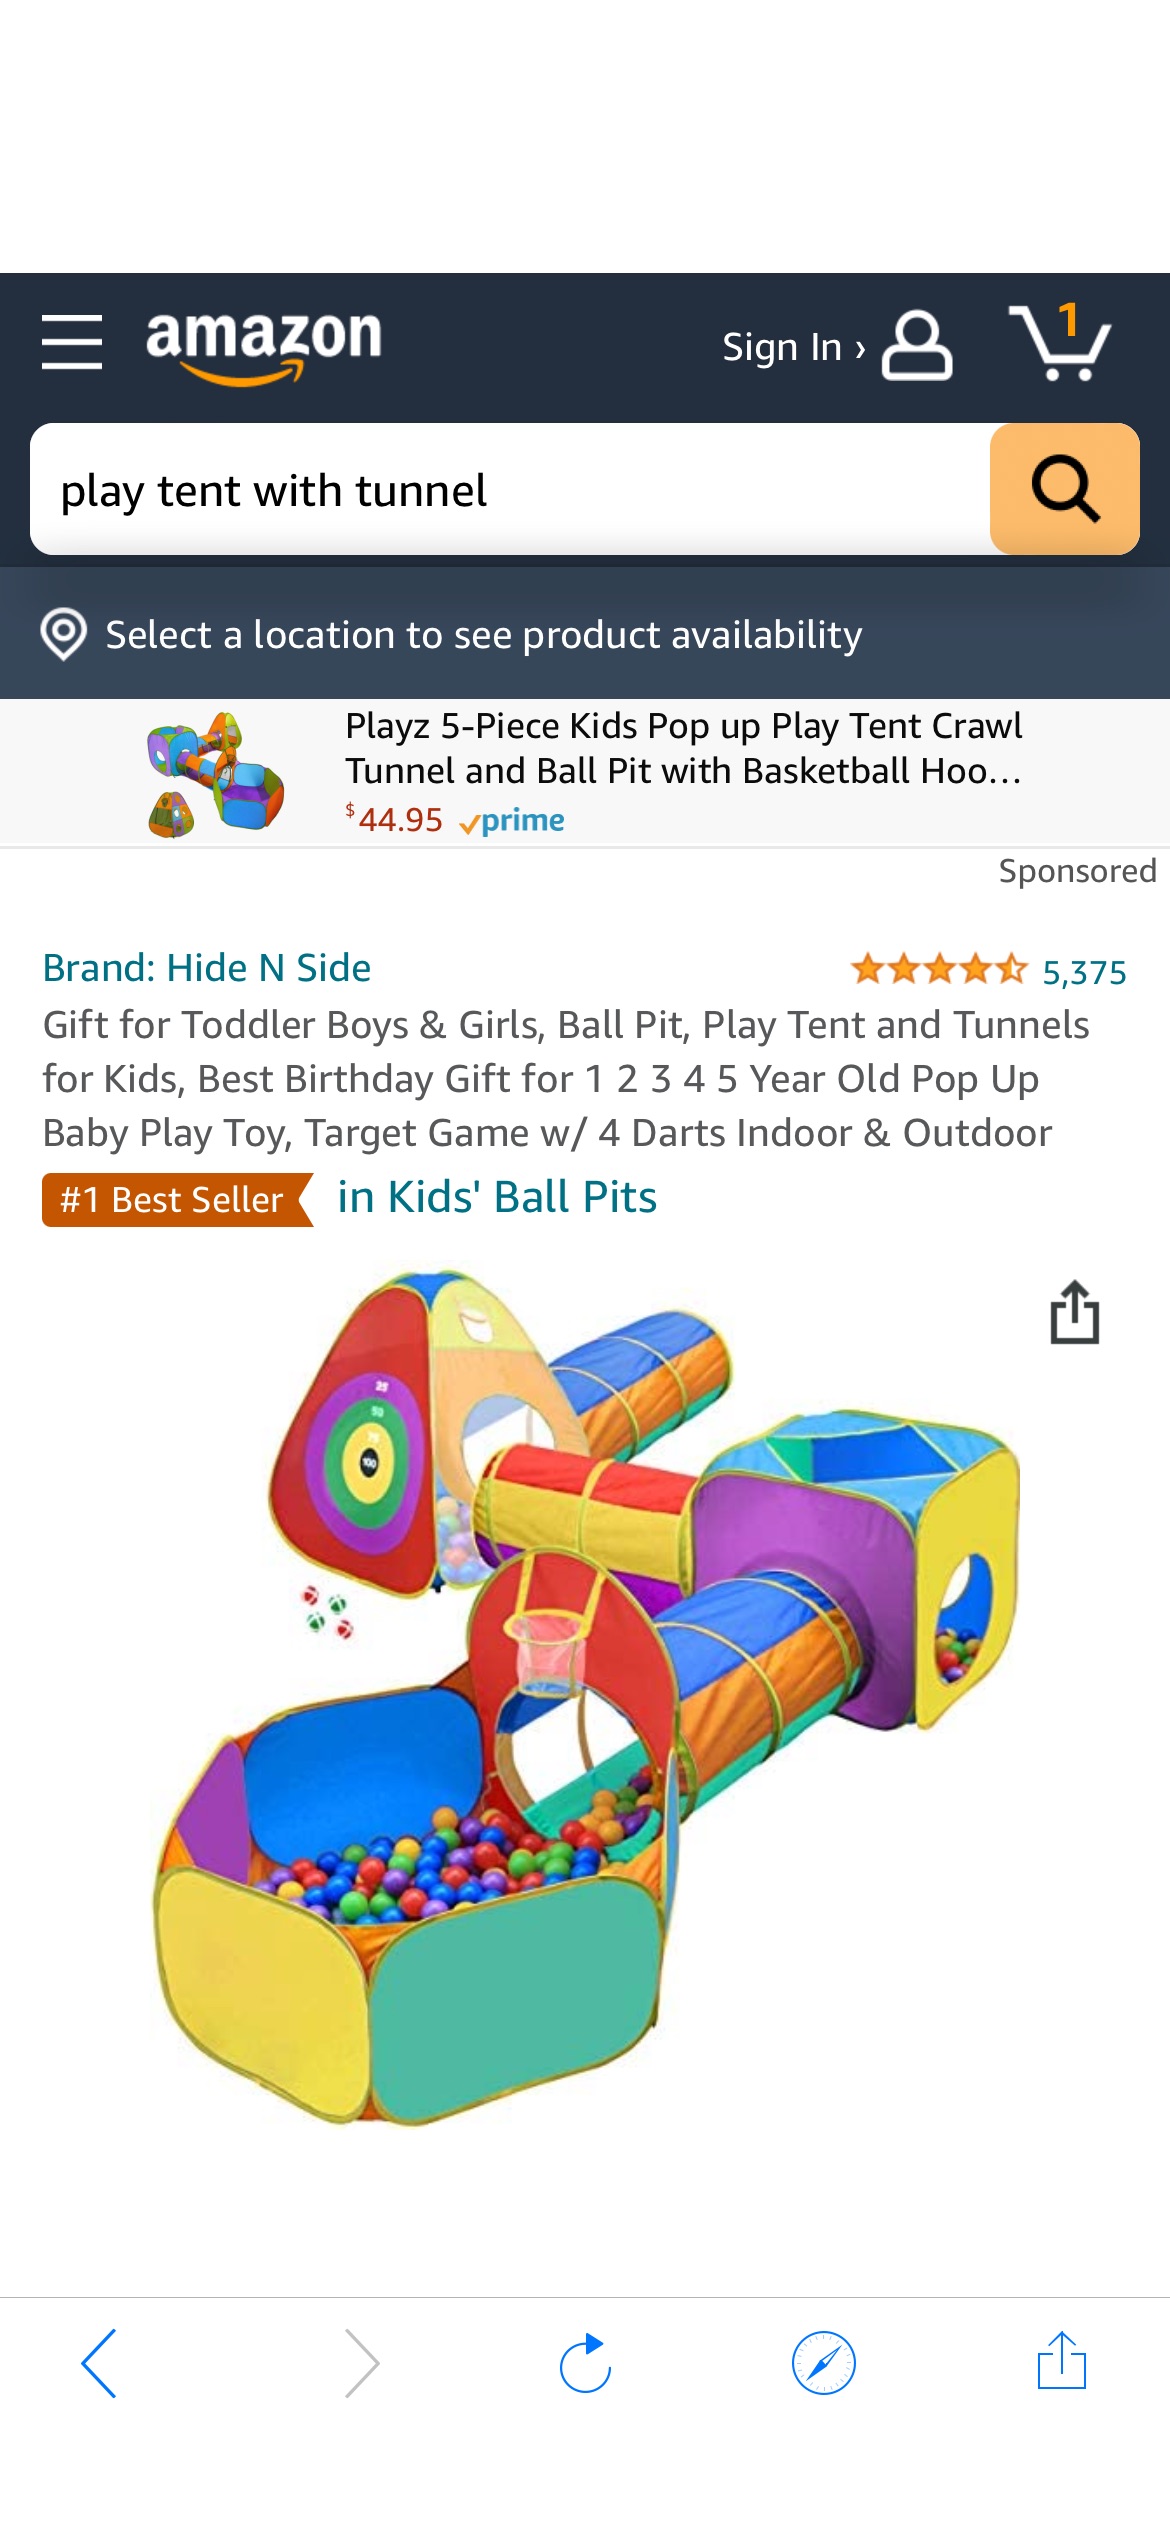 Amazon.com: Gift for Toddler Boys & Girls, Ball Pit, Play Tent and Tunnels for Kids, Best Birthday Gift for 1 2 3 4 5 Year Old 儿童海洋球隧道帐篷